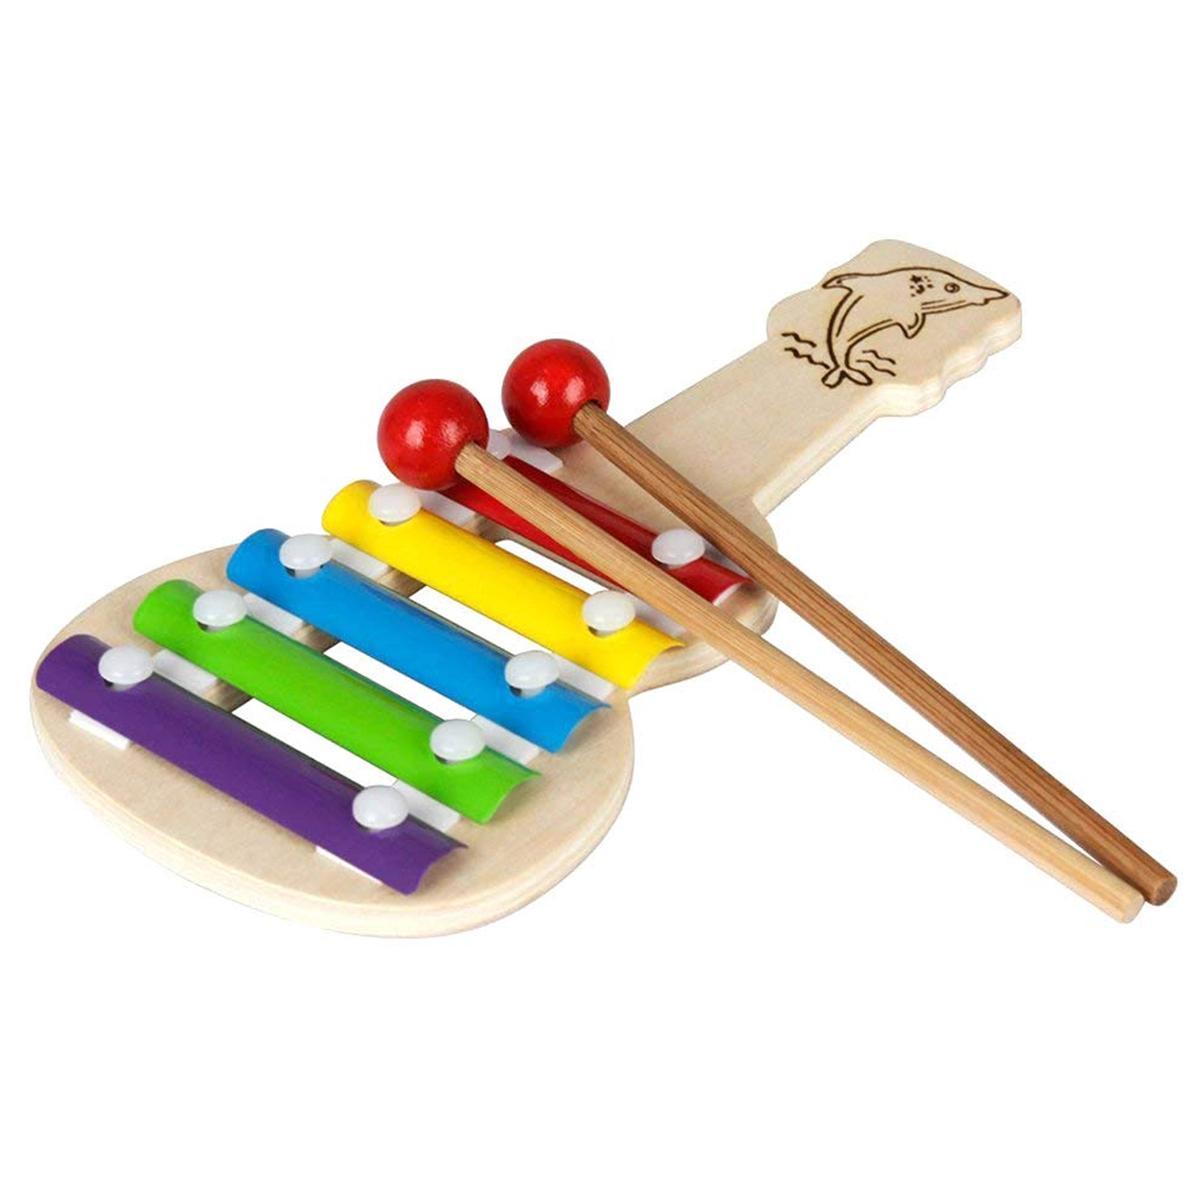 5 Scales Xylophone Baby Infant Toy 8 Inches Musical Instrument Puzzle Toys Musical Musical Instruments Children's Gifts - Multicolor